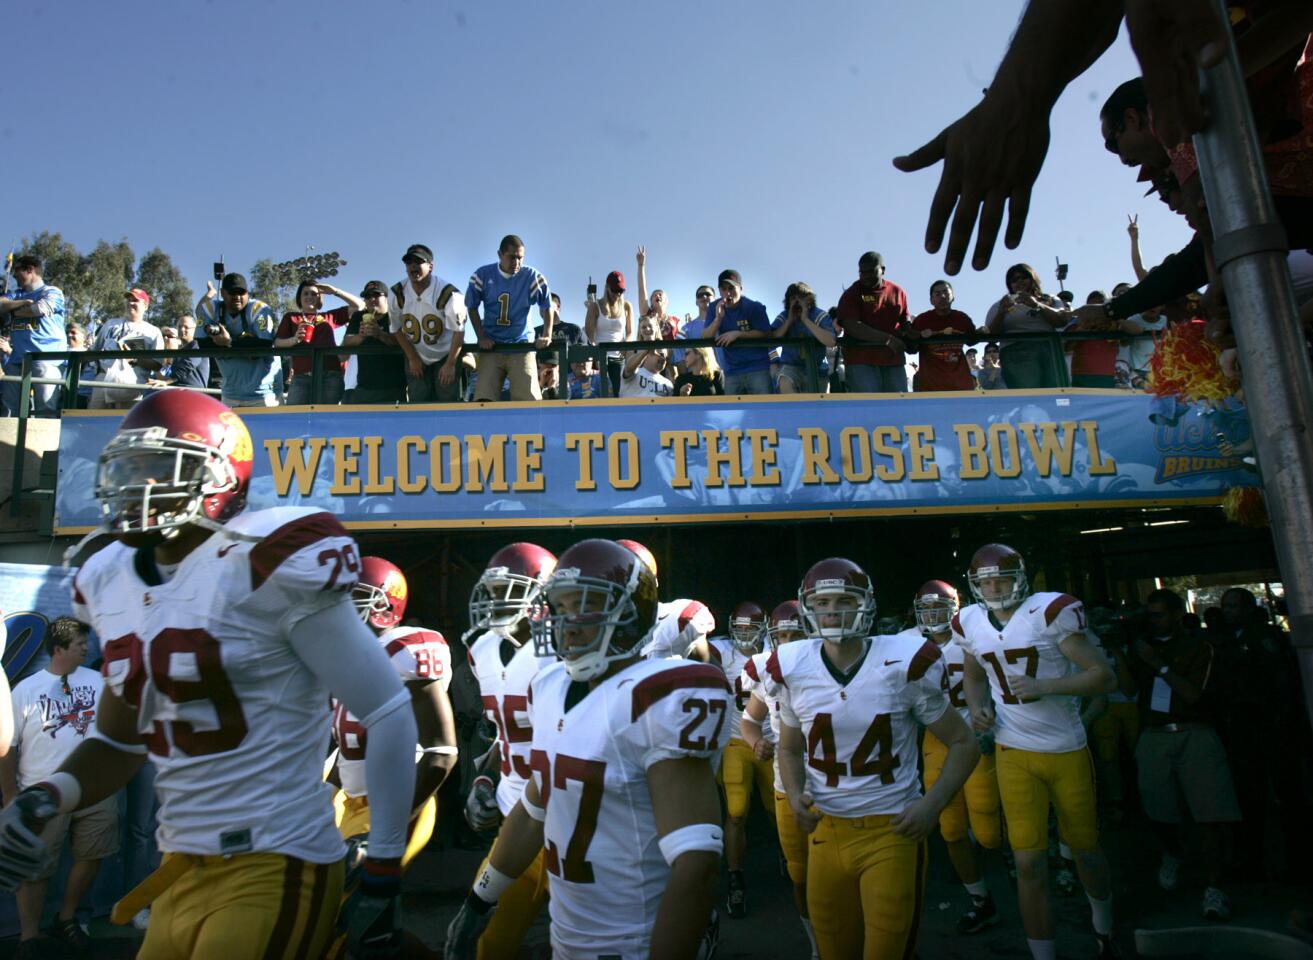 USC players run out on to the field before the game against UCLA at the Rose Bowl in Pasadena on Dec. 2, 2006.